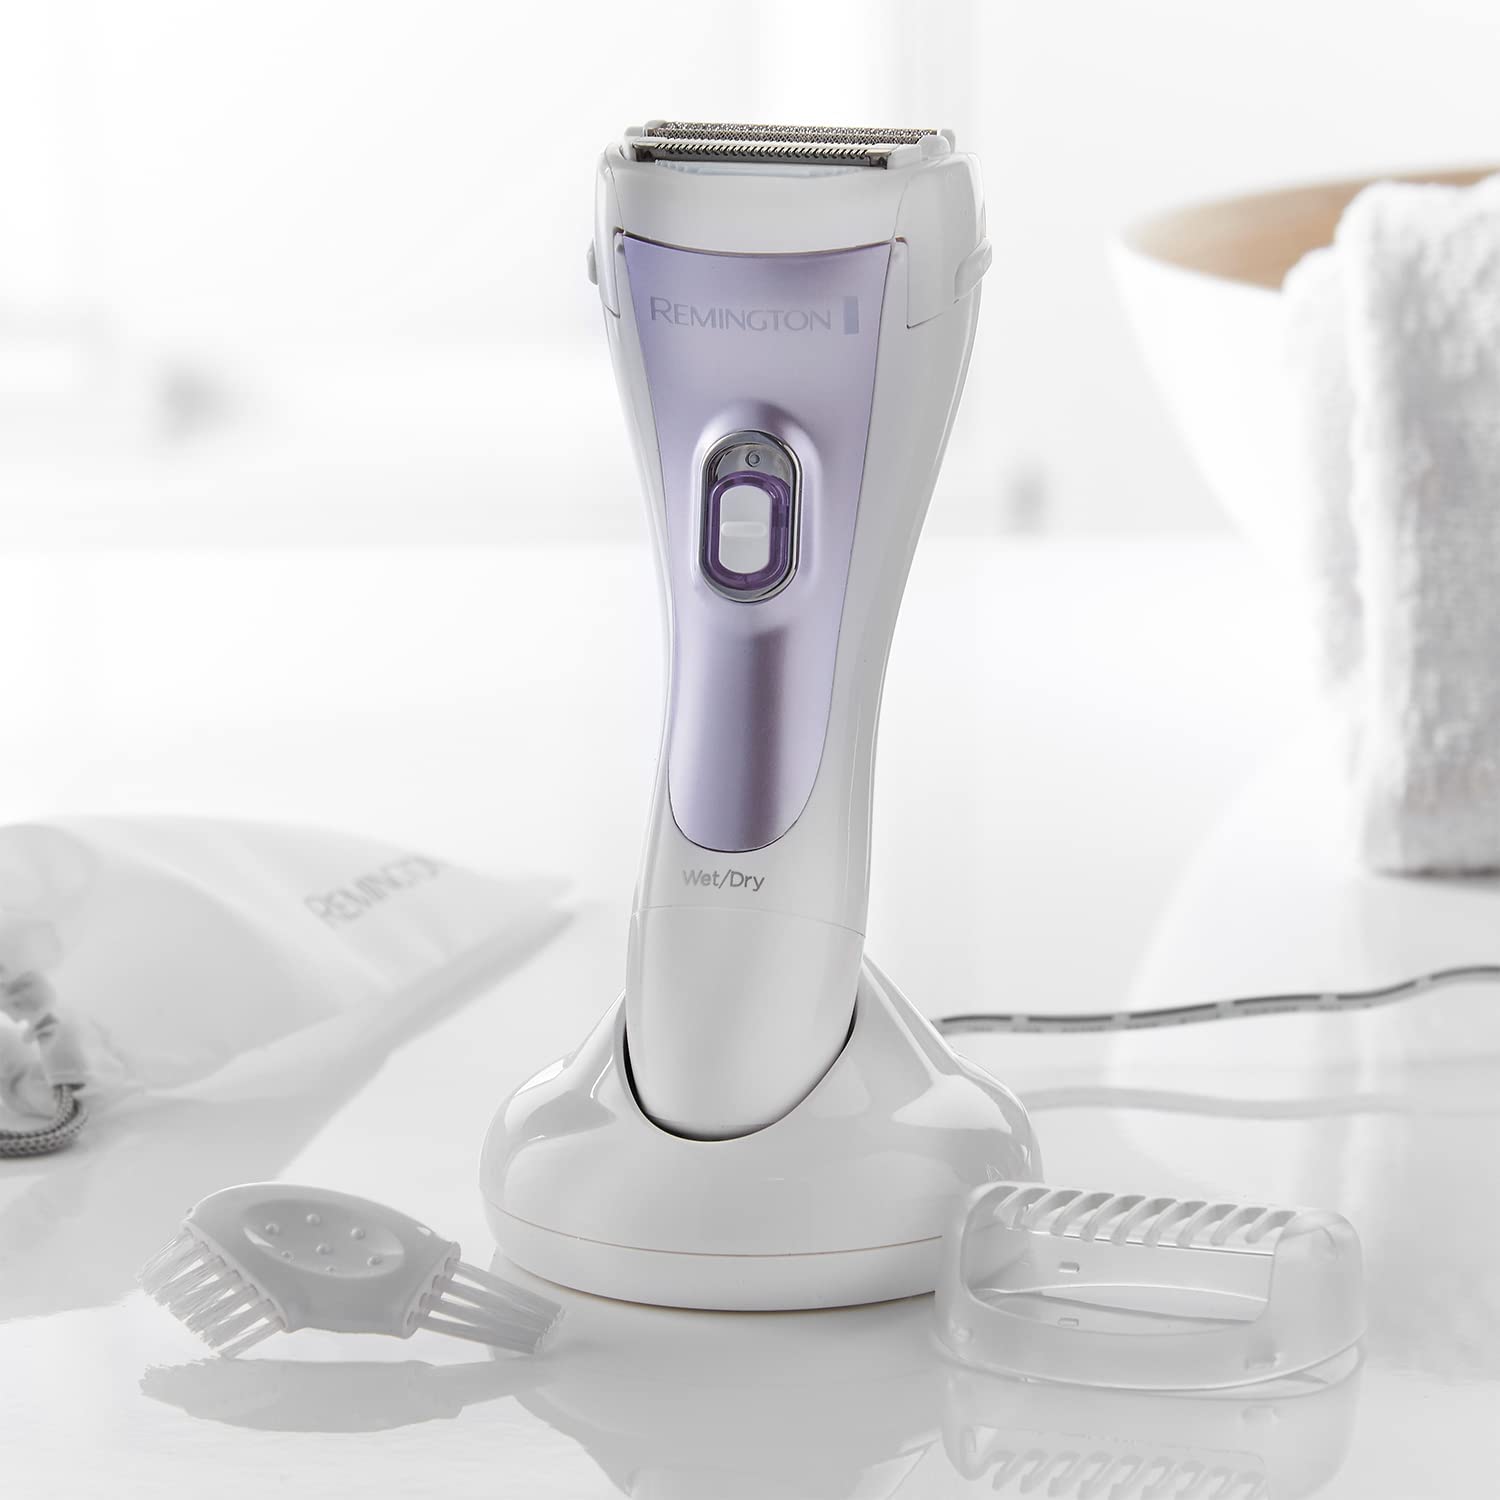 Remington Cordless Wet and Dry Lady Shaver, Showerproof Electric Razor with Bikini Attachment and Charge Stand, WDF4840, Purple - Healthxpress.ie